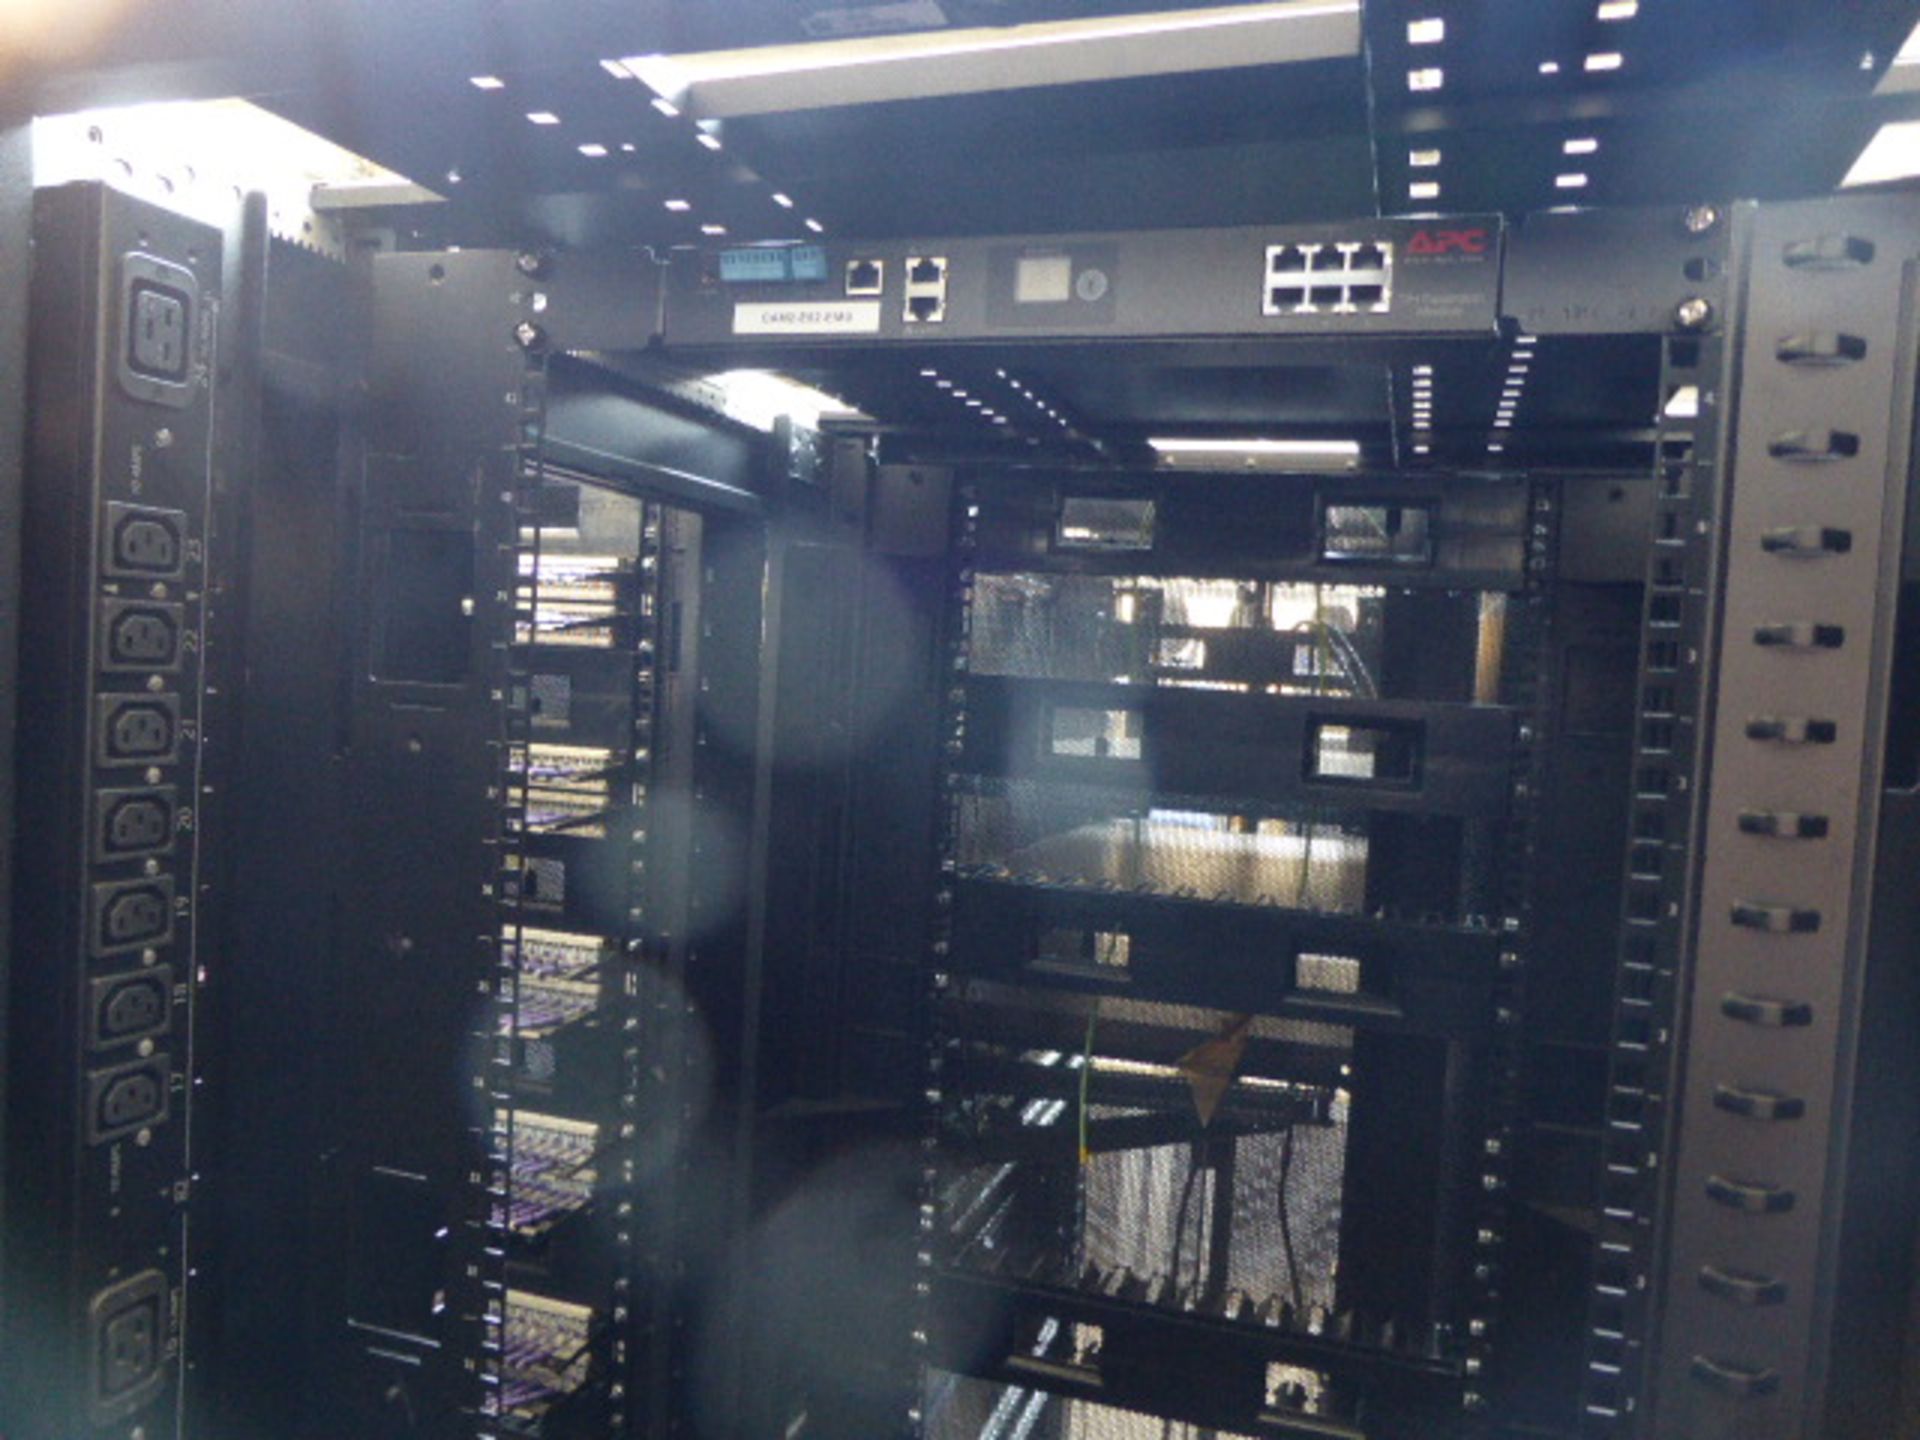 APC server cabinet on castors 75cm wide with 2 APC switch rack PDU units each with 24 outputs on - Image 2 of 3